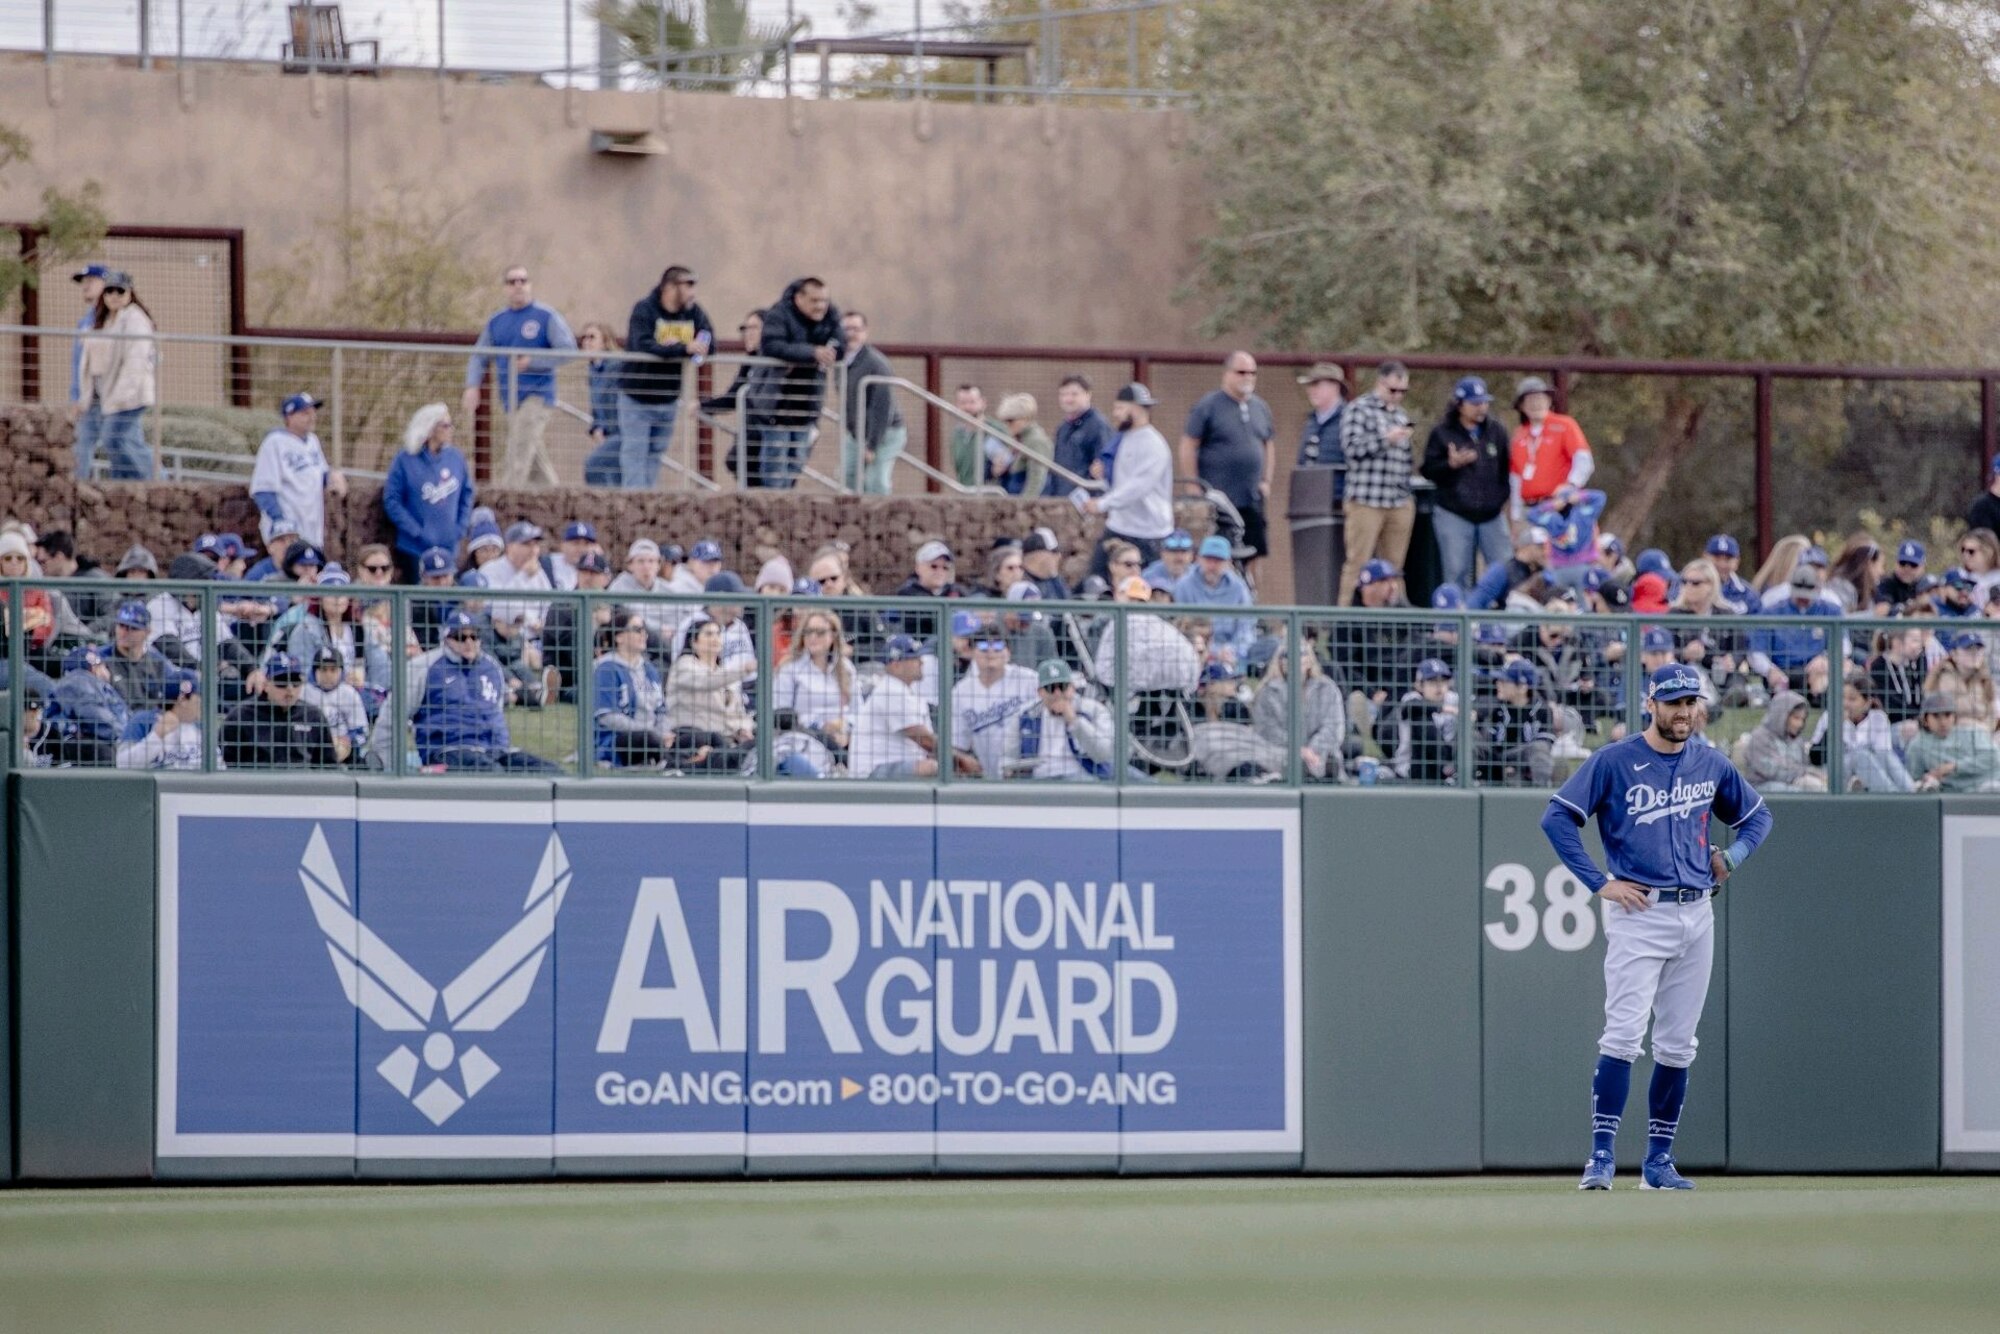 A Los Angeles Dodgers player stands in front of the Air National Guard outfield banner during a spring baseball game at Camelback Ranch–Glendale baseball complex in Phoenix, Feb. 28, 2023.